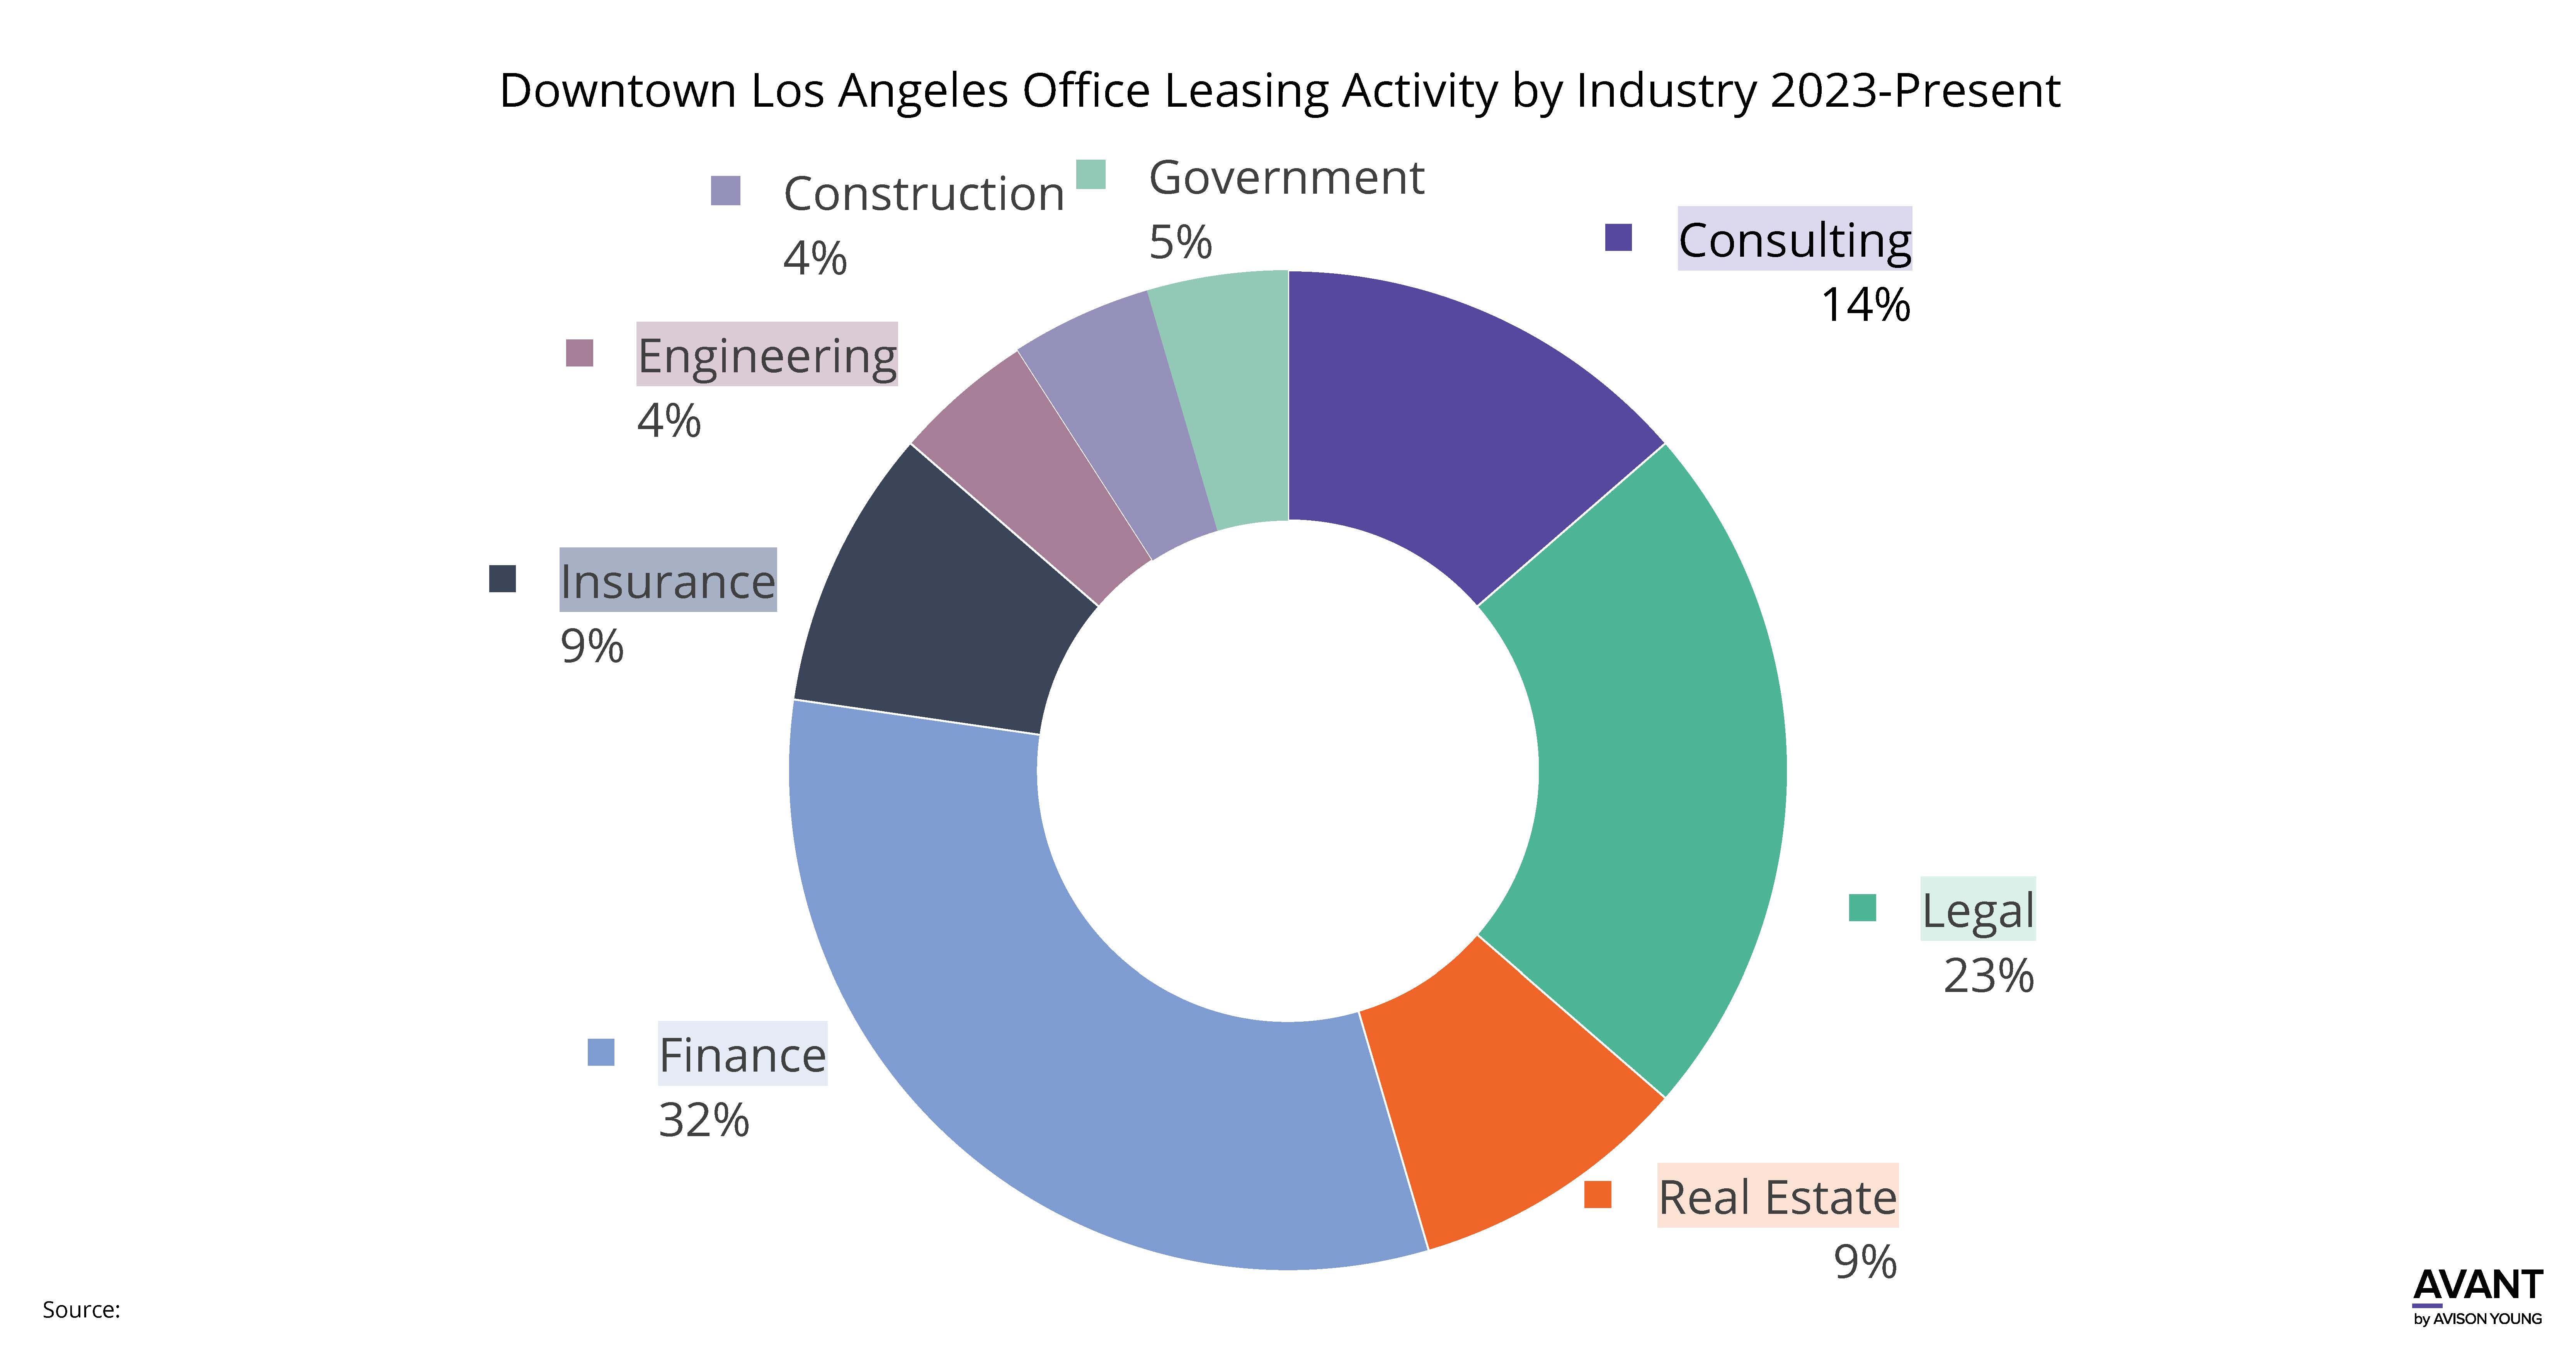 The chart illustrates the tenant makeup by industry for recently signed leases in Downtown Los Angeles